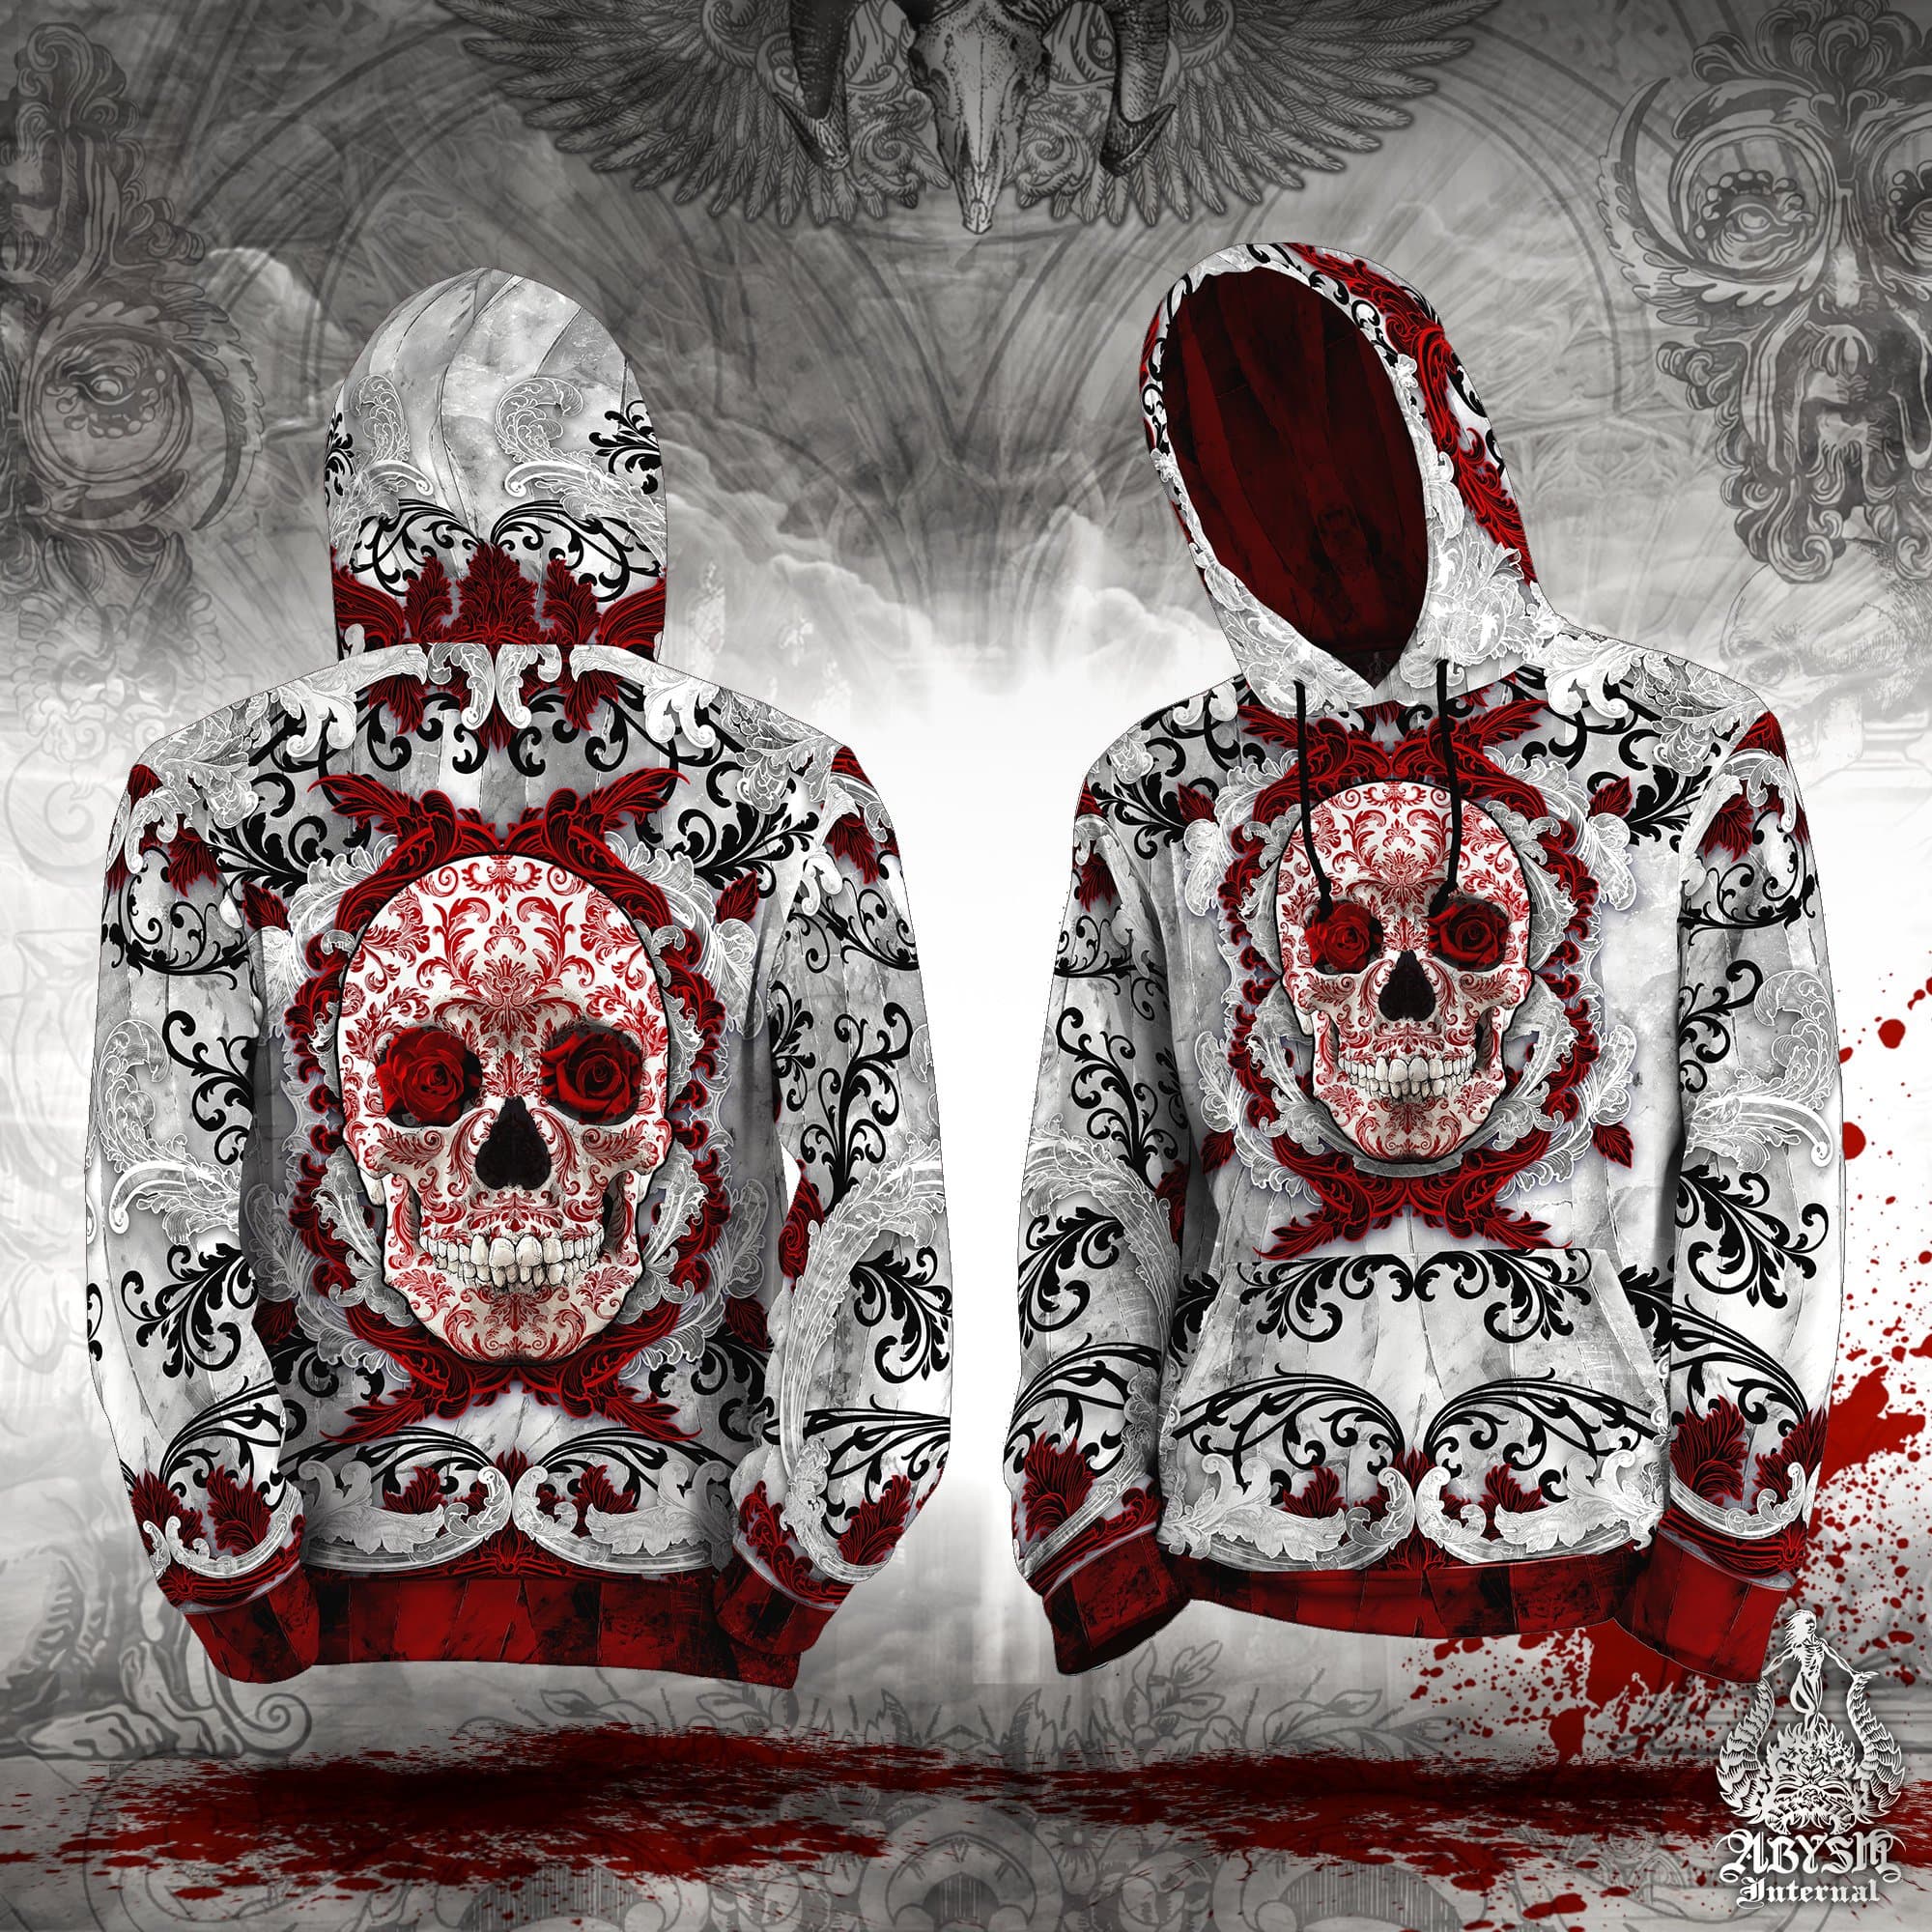 Skull Hoodie, White Goth Streetwear, Street Outfit, Gothic Sweater, Alternative Clothing, Unisex - Bloody - Abysm Internal